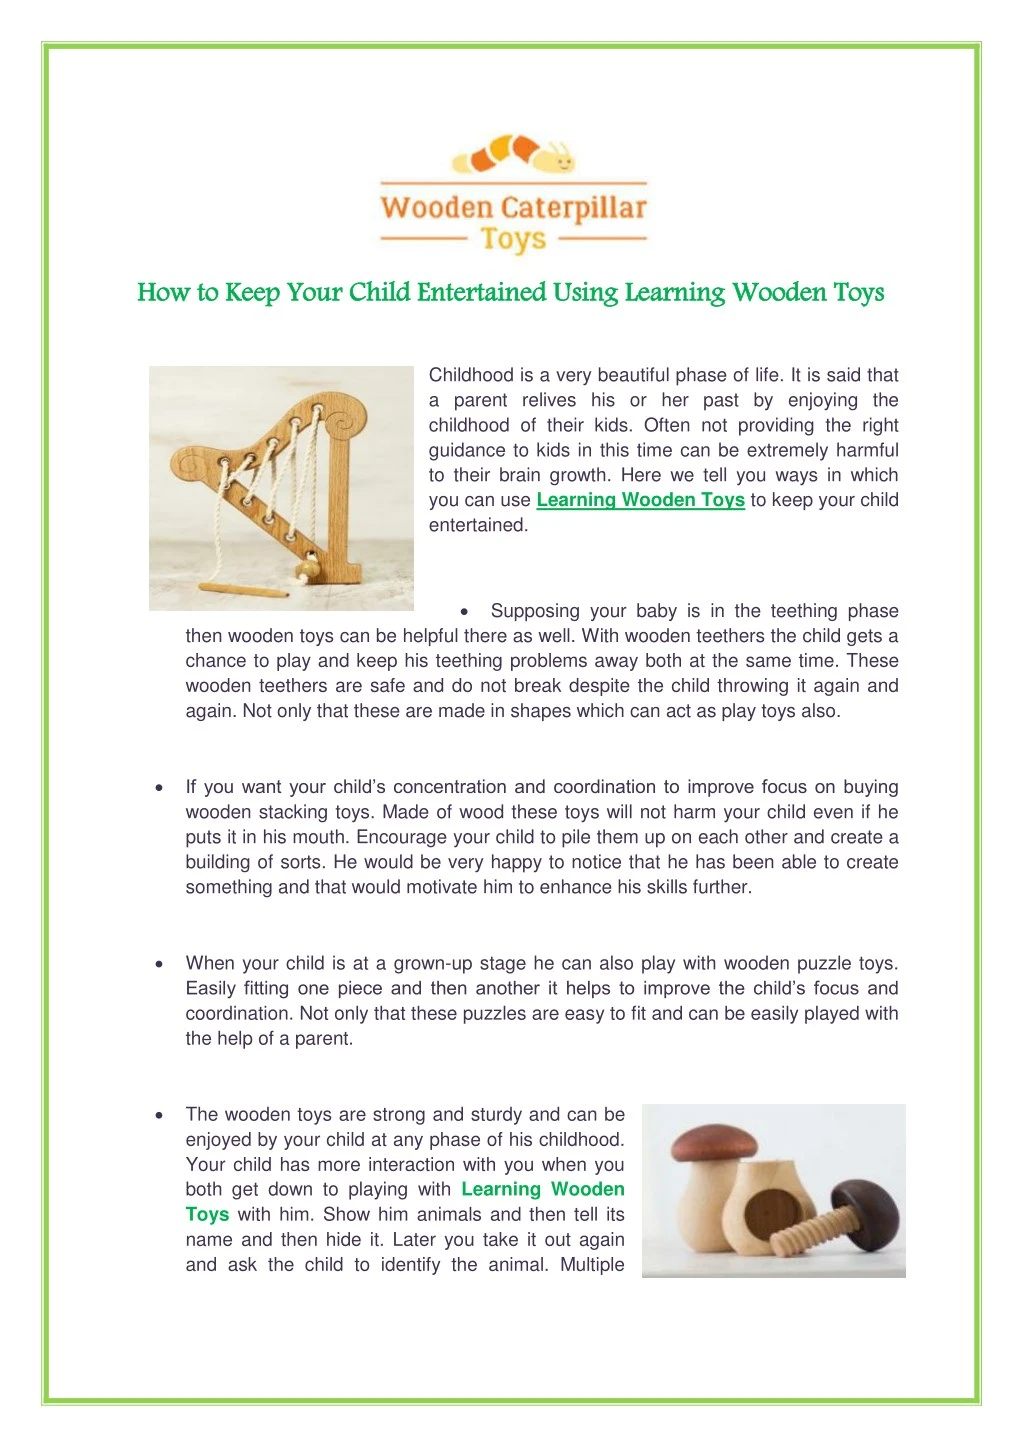 how to keep your child entertained using learning